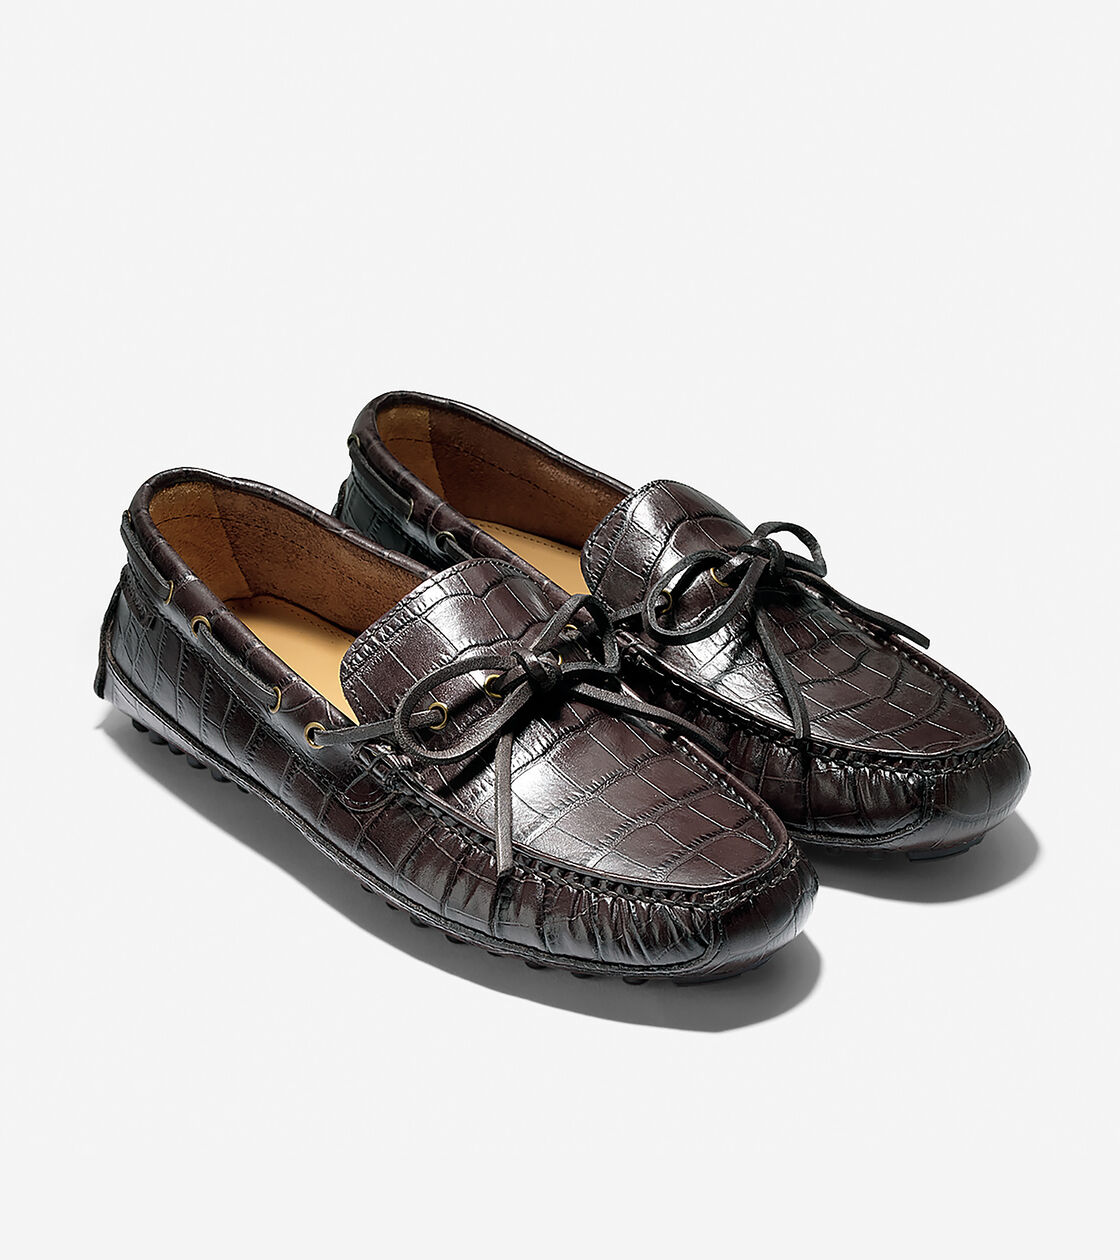 Grant Canoe Camp Moccasins in Chestnut Croc Print | Cole Haan